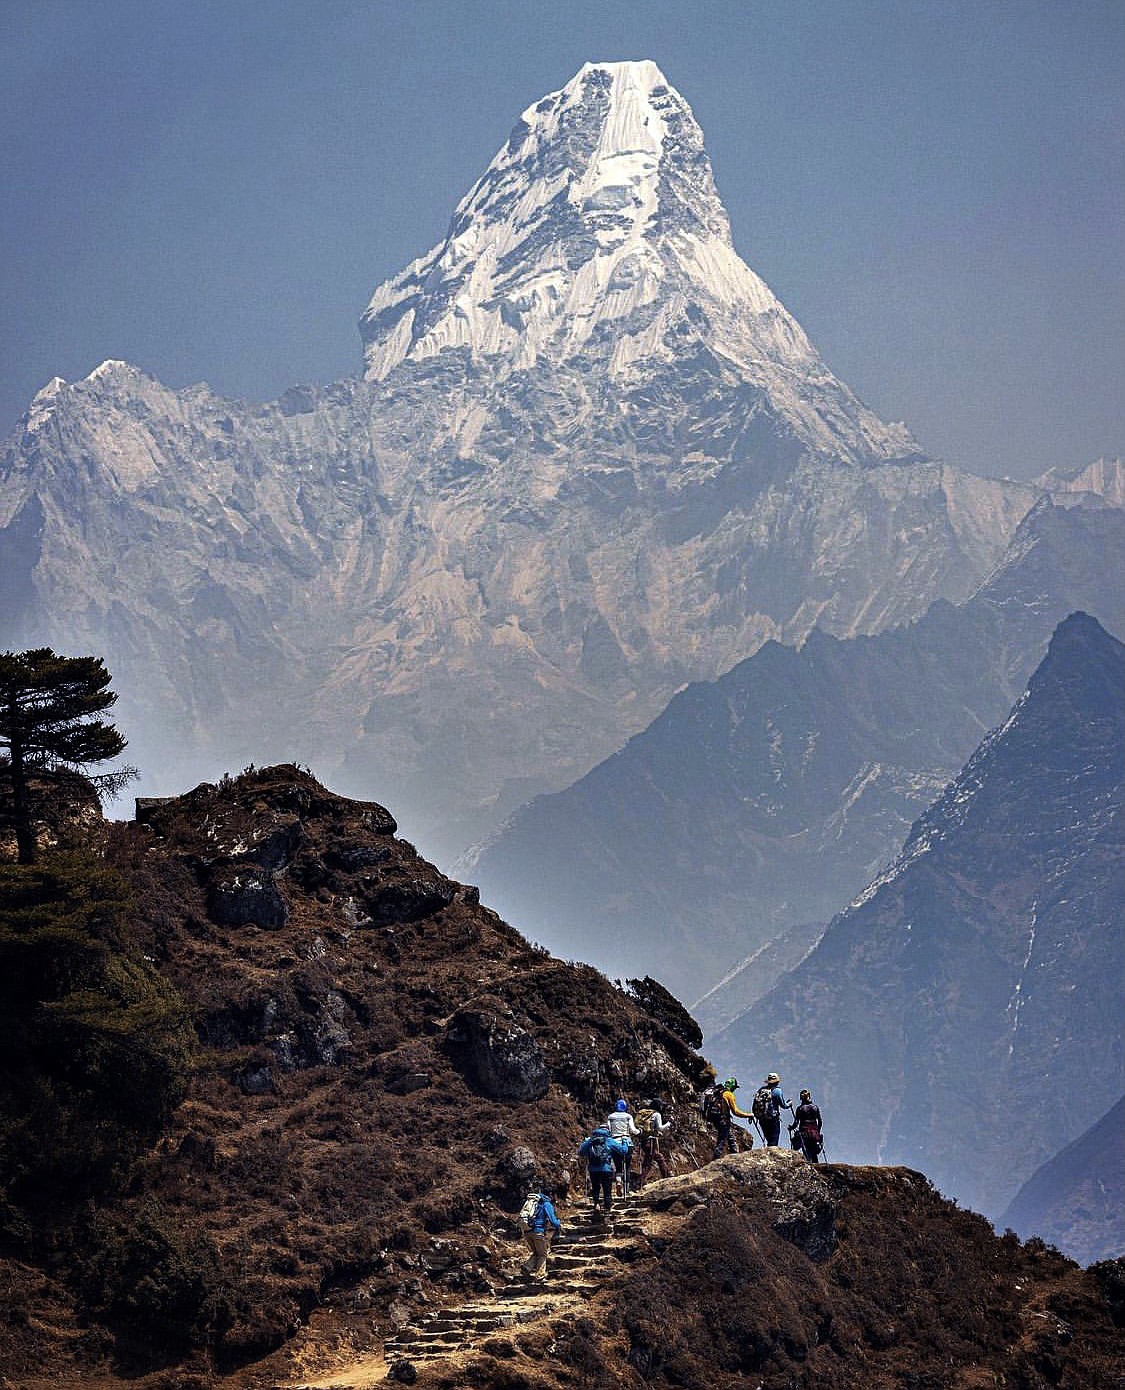 At 22,349 feet, Ama Dablam looms over the path from Namche to Everest Base Camp in Nepal. (Photo courtesy of Steve Stevens)